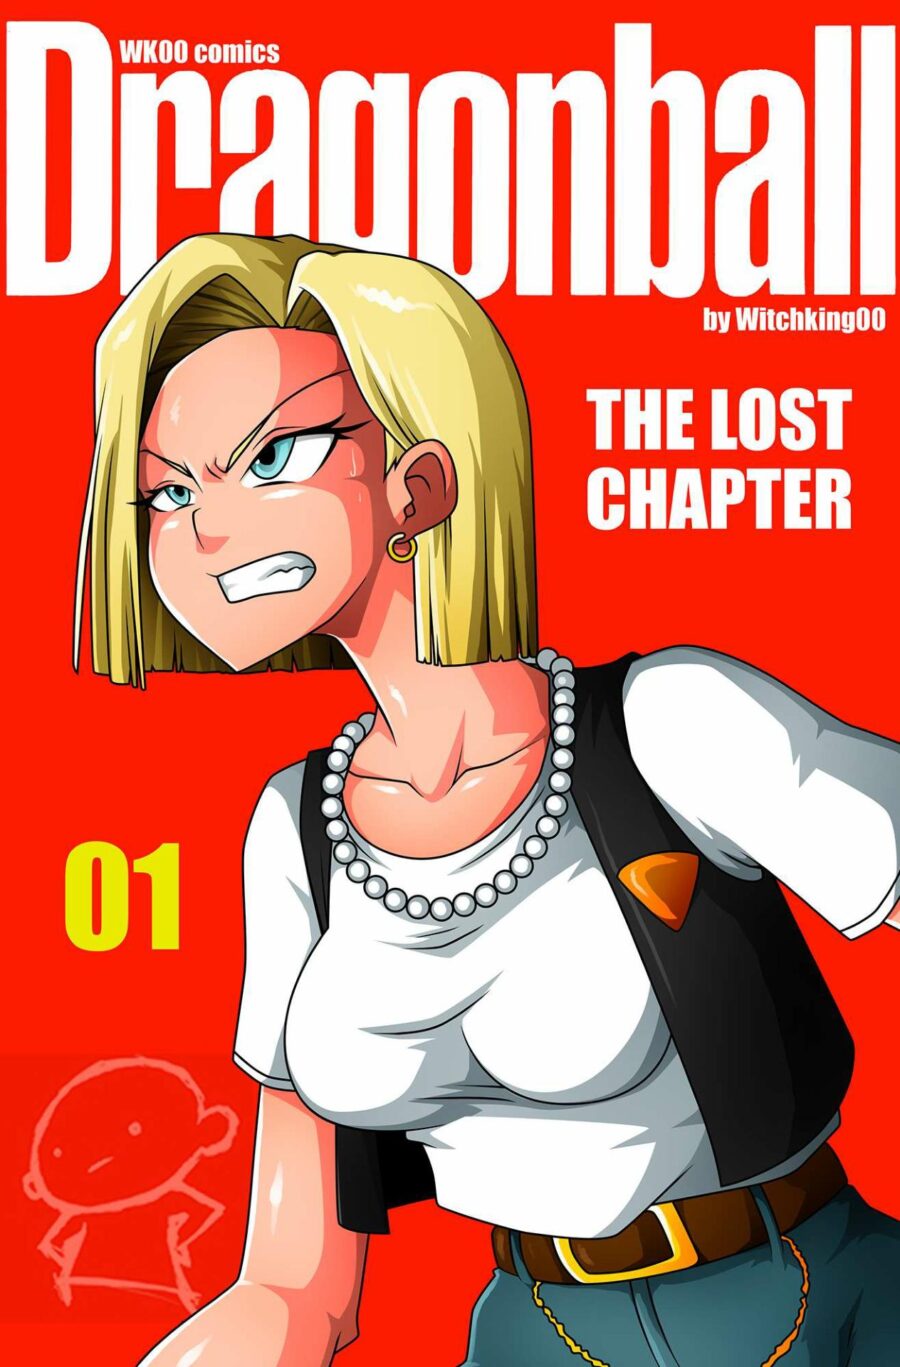 Dragon Ball - The Lost Chapter 01 Porn Comic by Witchking00